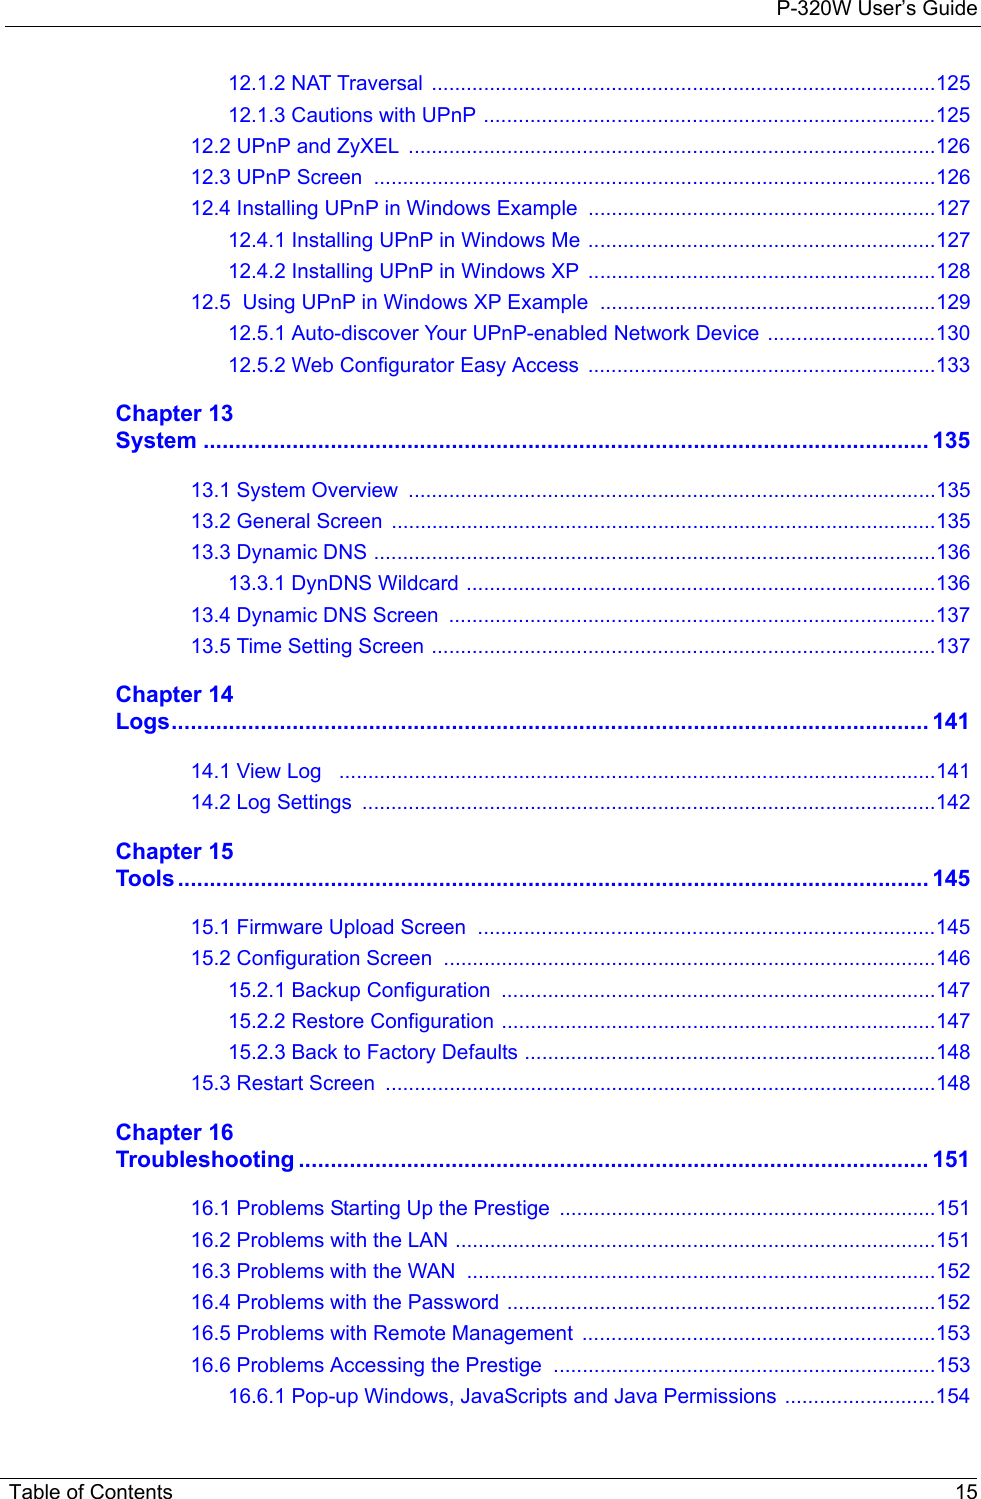 P-320W User’s Guide Table of Contents 1512.1.2 NAT Traversal .......................................................................................12512.1.3 Cautions with UPnP ..............................................................................12512.2 UPnP and ZyXEL  ...........................................................................................12612.3 UPnP Screen  .................................................................................................12612.4 Installing UPnP in Windows Example  ............................................................12712.4.1 Installing UPnP in Windows Me ............................................................12712.4.2 Installing UPnP in Windows XP  ............................................................12812.5  Using UPnP in Windows XP Example  ..........................................................12912.5.1 Auto-discover Your UPnP-enabled Network Device .............................13012.5.2 Web Configurator Easy Access  ............................................................133Chapter 13System .................................................................................................................. 13513.1 System Overview  ...........................................................................................13513.2 General Screen  ..............................................................................................13513.3 Dynamic DNS .................................................................................................13613.3.1 DynDNS Wildcard .................................................................................13613.4 Dynamic DNS Screen  ....................................................................................13713.5 Time Setting Screen .......................................................................................137Chapter 14Logs....................................................................................................................... 14114.1 View Log   .......................................................................................................14114.2 Log Settings  ...................................................................................................142Chapter 15Tools...................................................................................................................... 14515.1 Firmware Upload Screen  ...............................................................................14515.2 Configuration Screen  .....................................................................................14615.2.1 Backup Configuration ...........................................................................14715.2.2 Restore Configuration ...........................................................................14715.2.3 Back to Factory Defaults .......................................................................14815.3 Restart Screen  ...............................................................................................148Chapter 16Troubleshooting ................................................................................................... 15116.1 Problems Starting Up the Prestige  .................................................................15116.2 Problems with the LAN ...................................................................................15116.3 Problems with the WAN  .................................................................................15216.4 Problems with the Password ..........................................................................15216.5 Problems with Remote Management  .............................................................15316.6 Problems Accessing the Prestige  ..................................................................15316.6.1 Pop-up Windows, JavaScripts and Java Permissions ..........................154